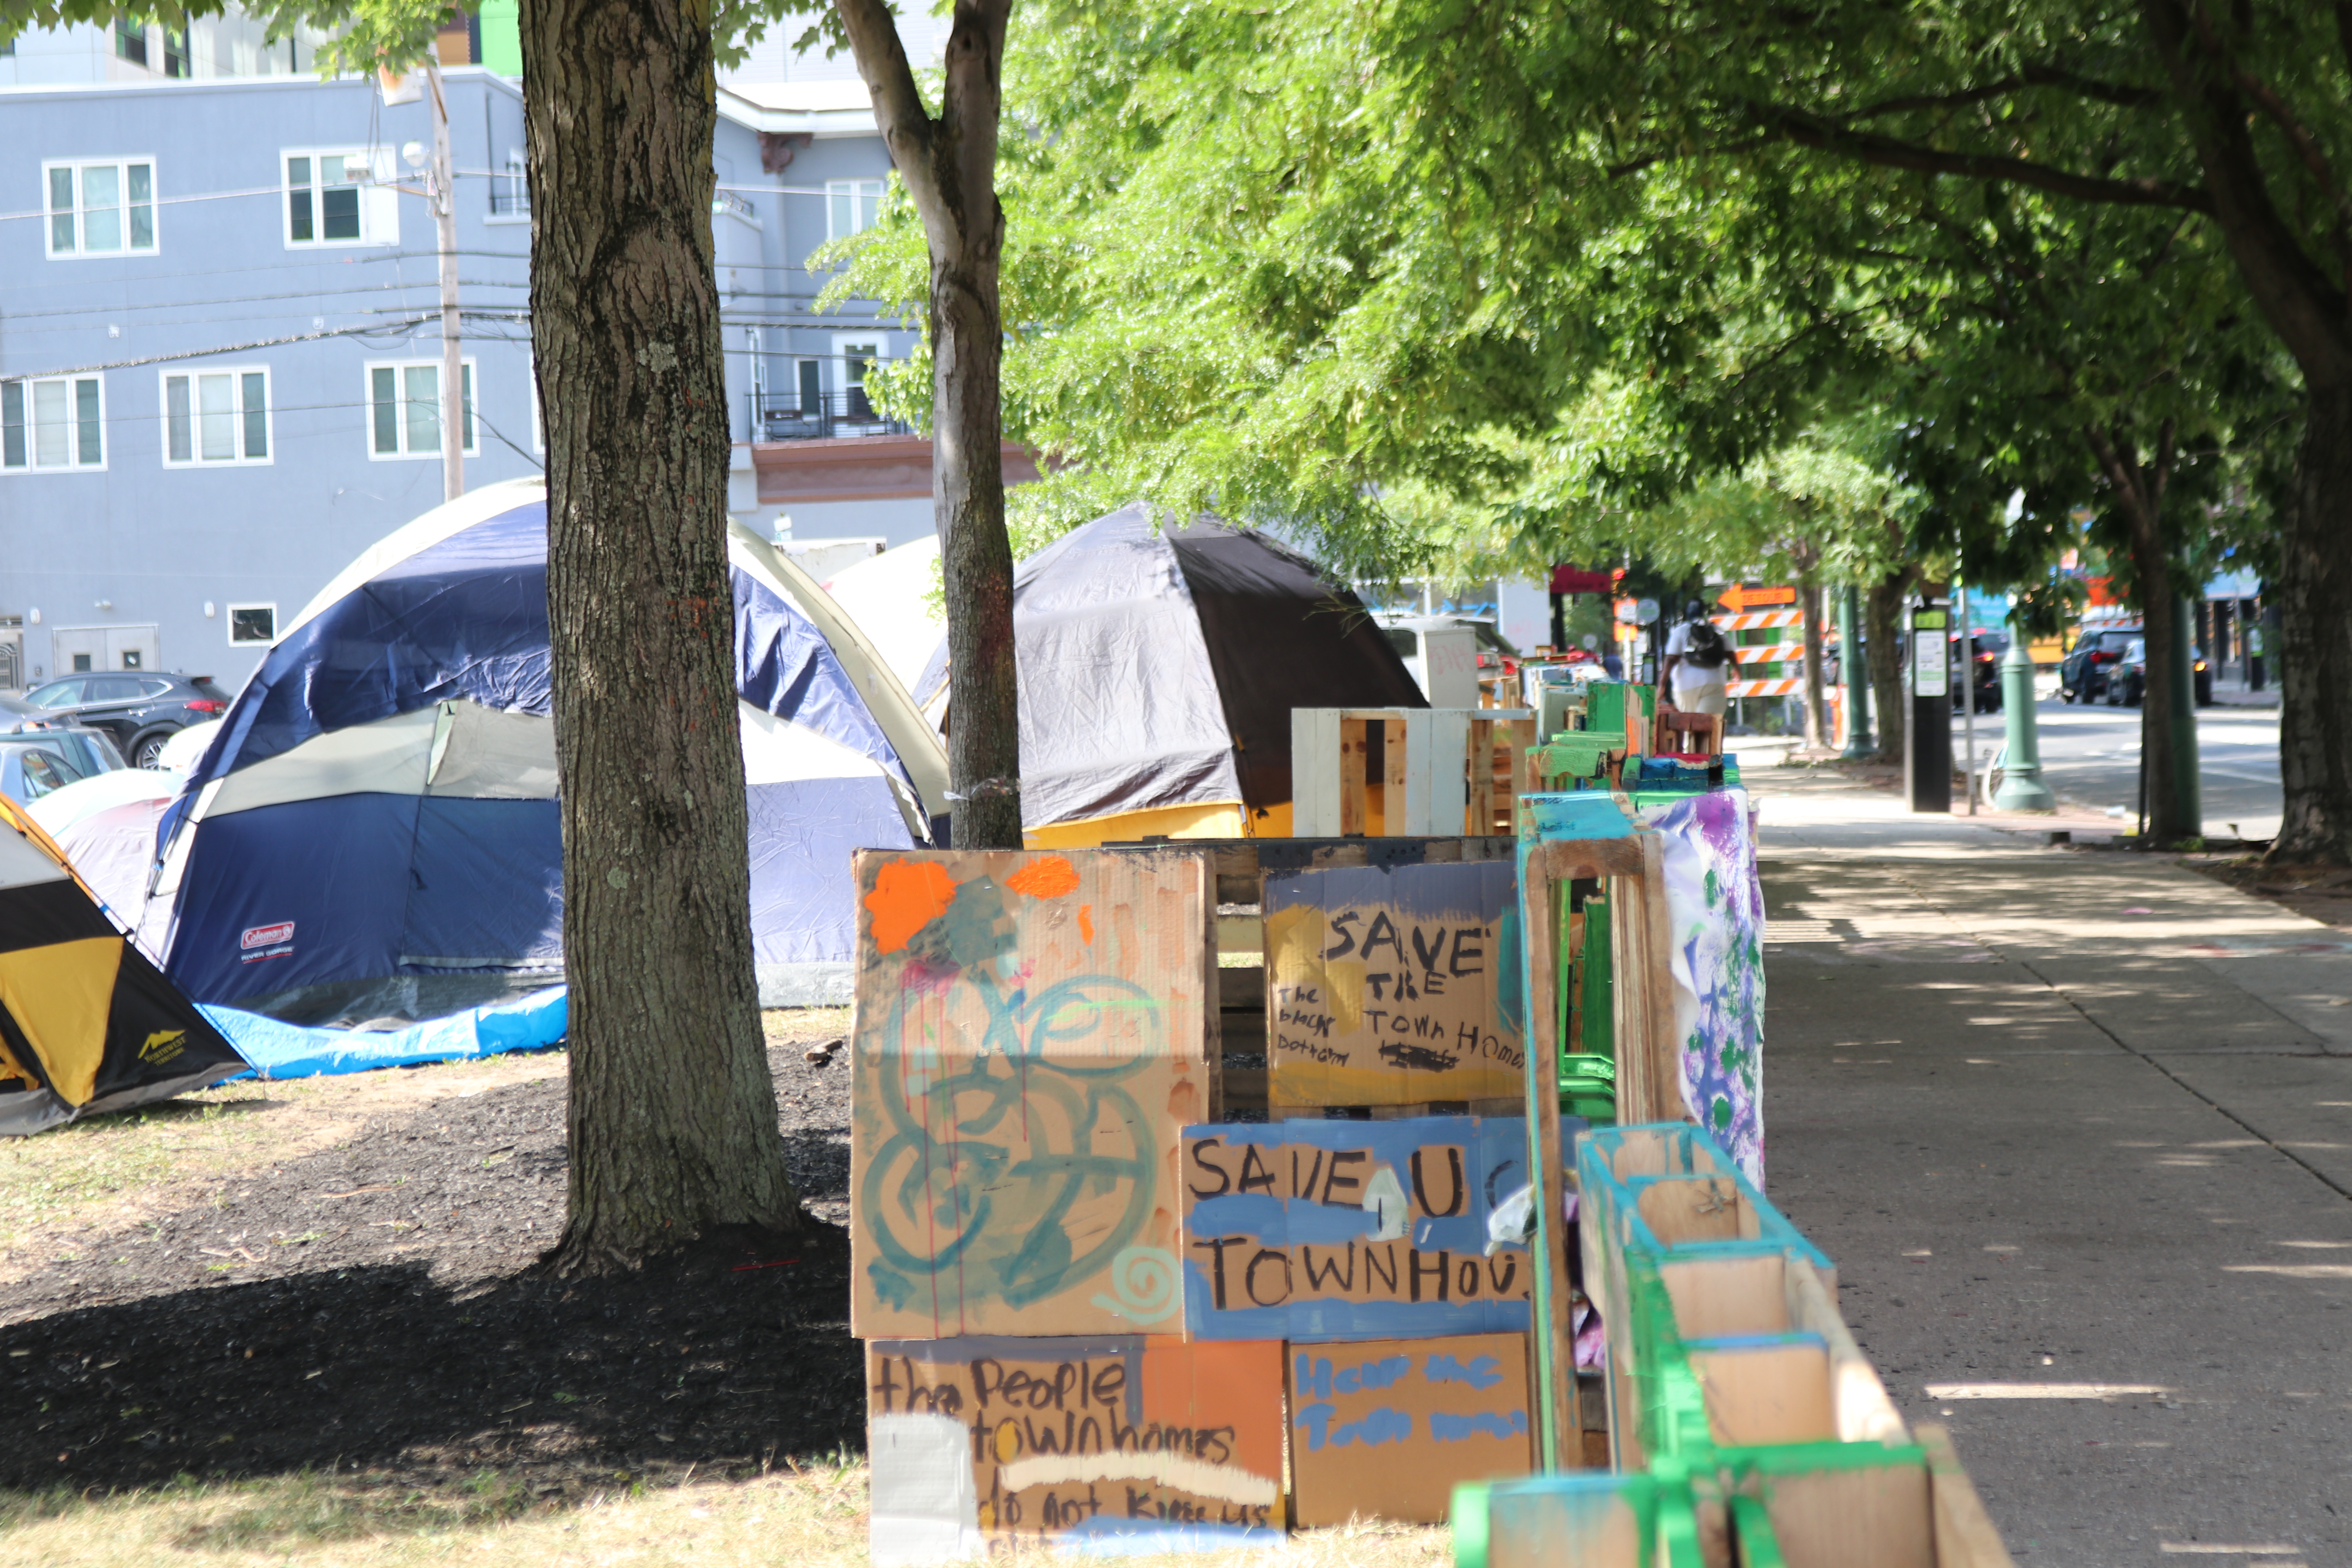 Pictured: Tents were set up in the UC Townhomes courtyard in protest of the sale.